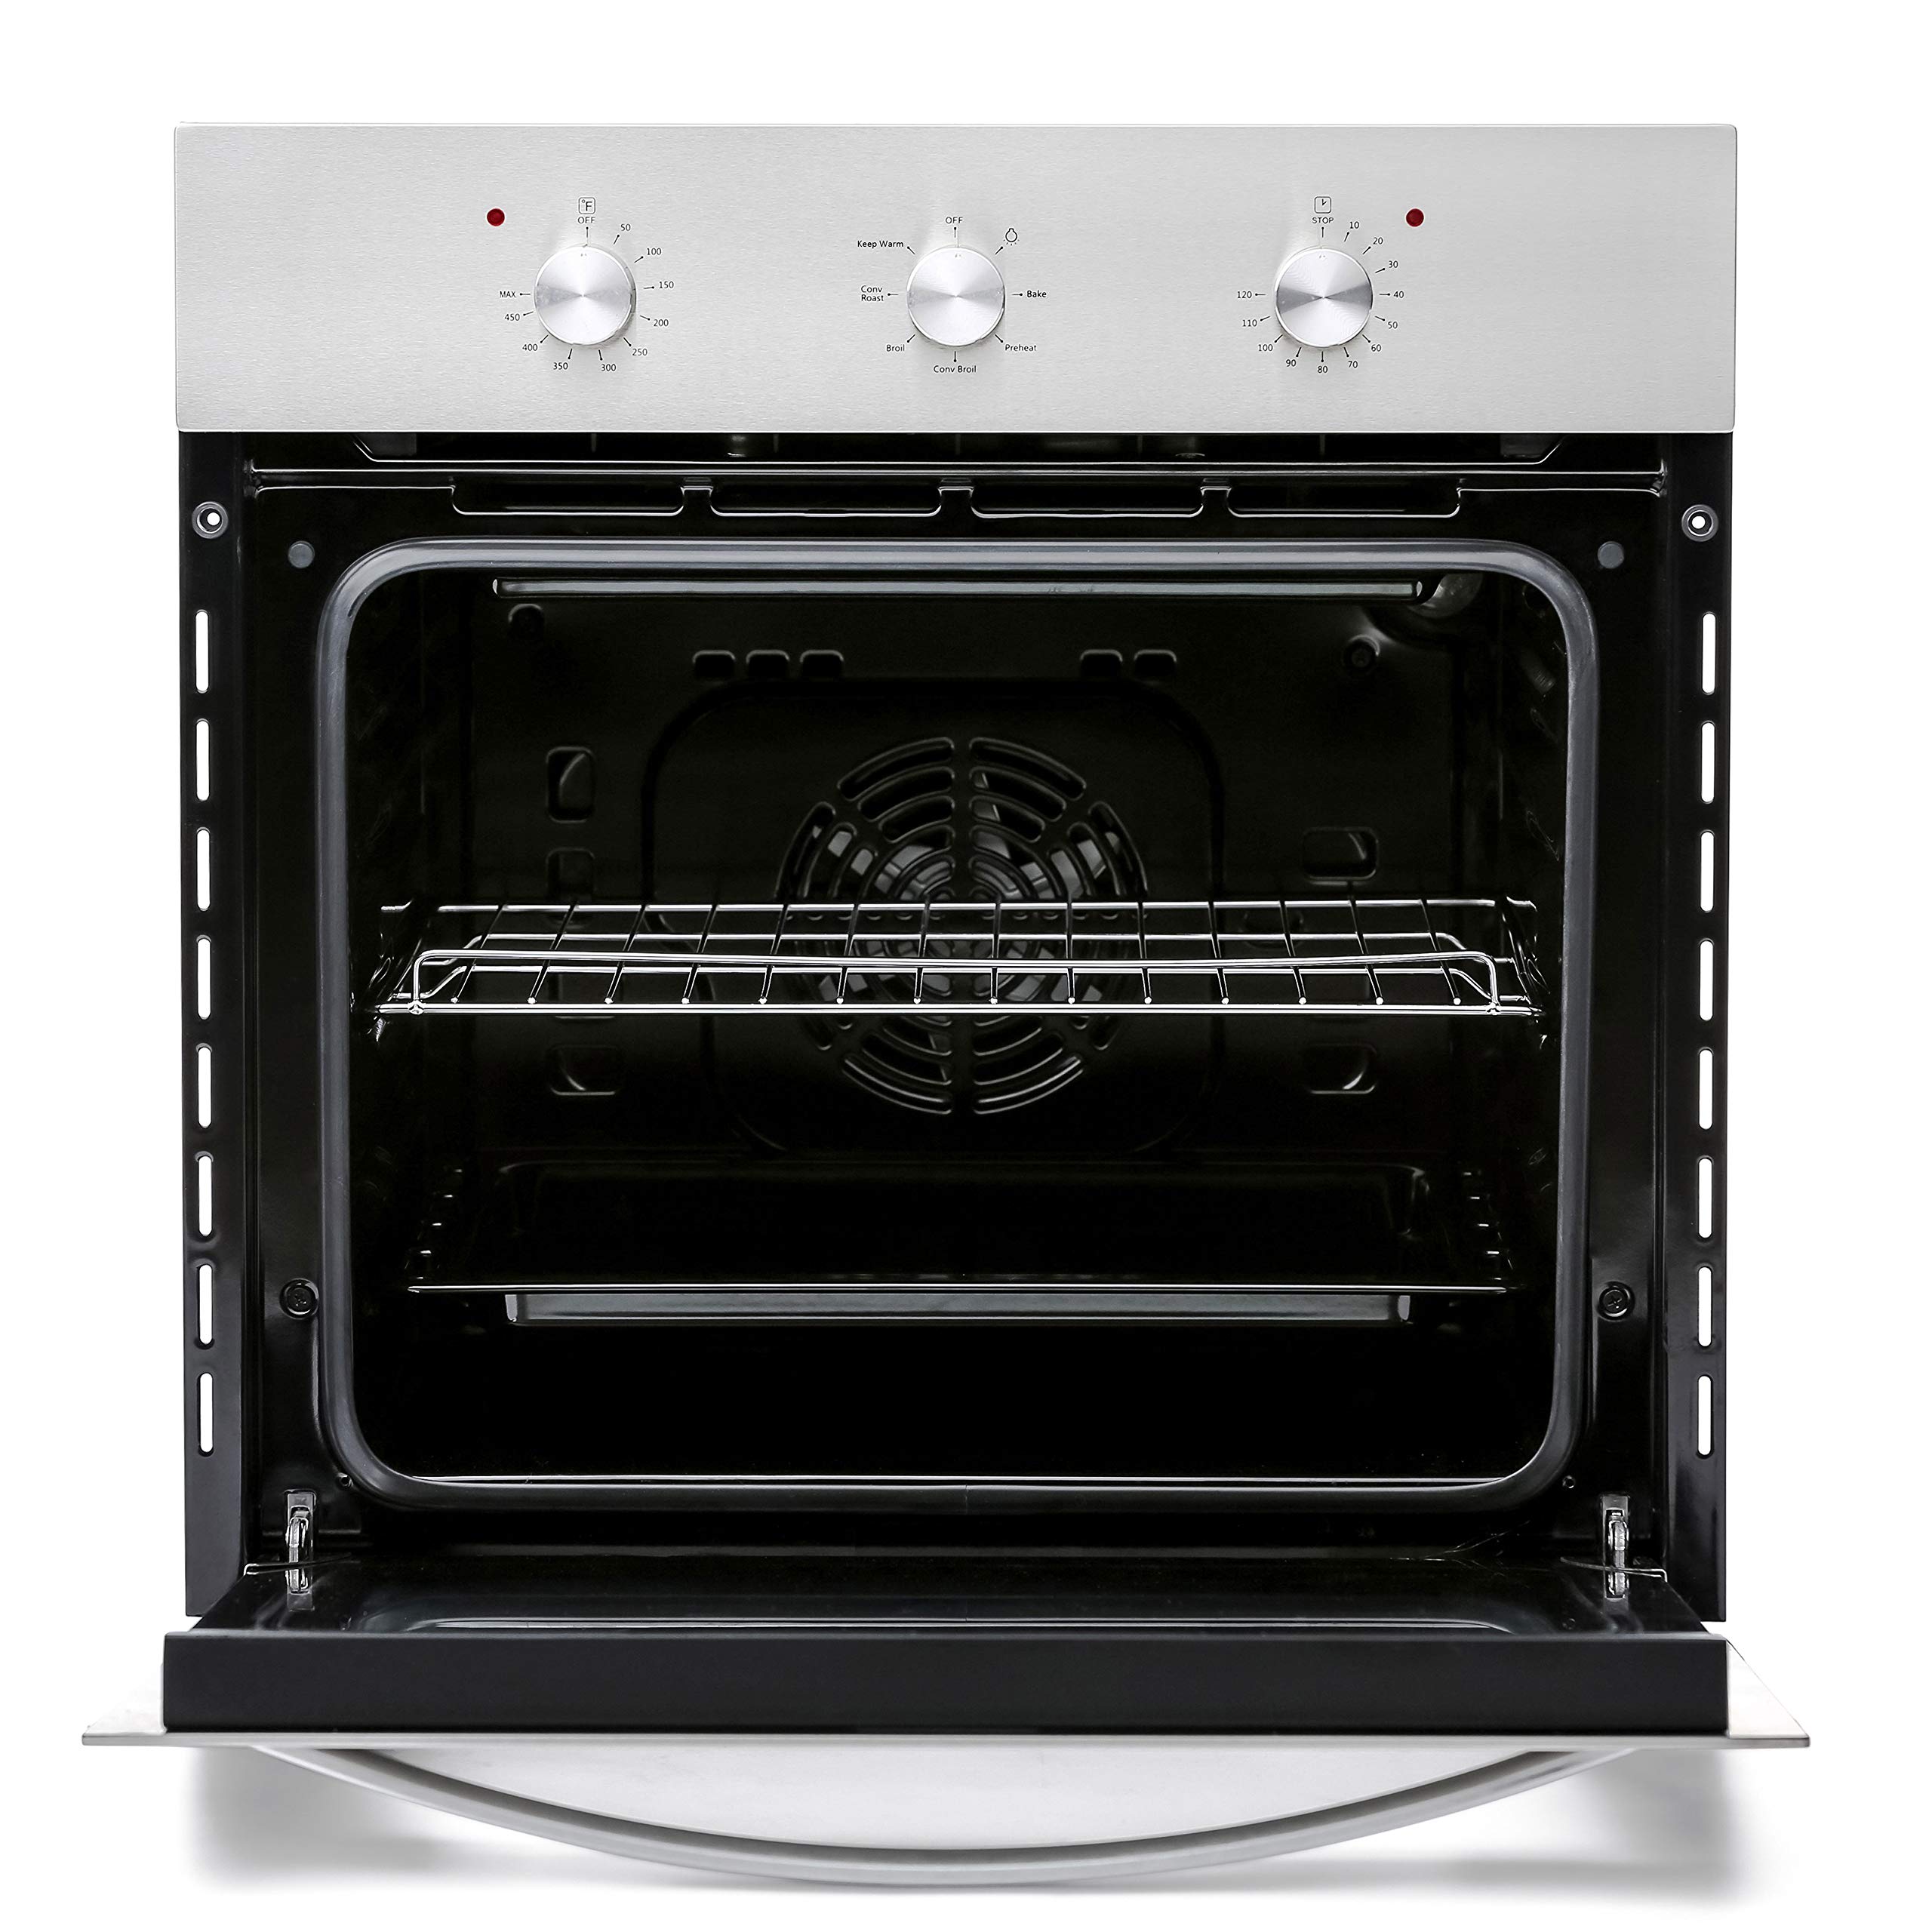 Empava EMPV-24WOB14 with 6 Cooking Functions Mechanical Knobs Control in Stainless Steel, 24 Inch